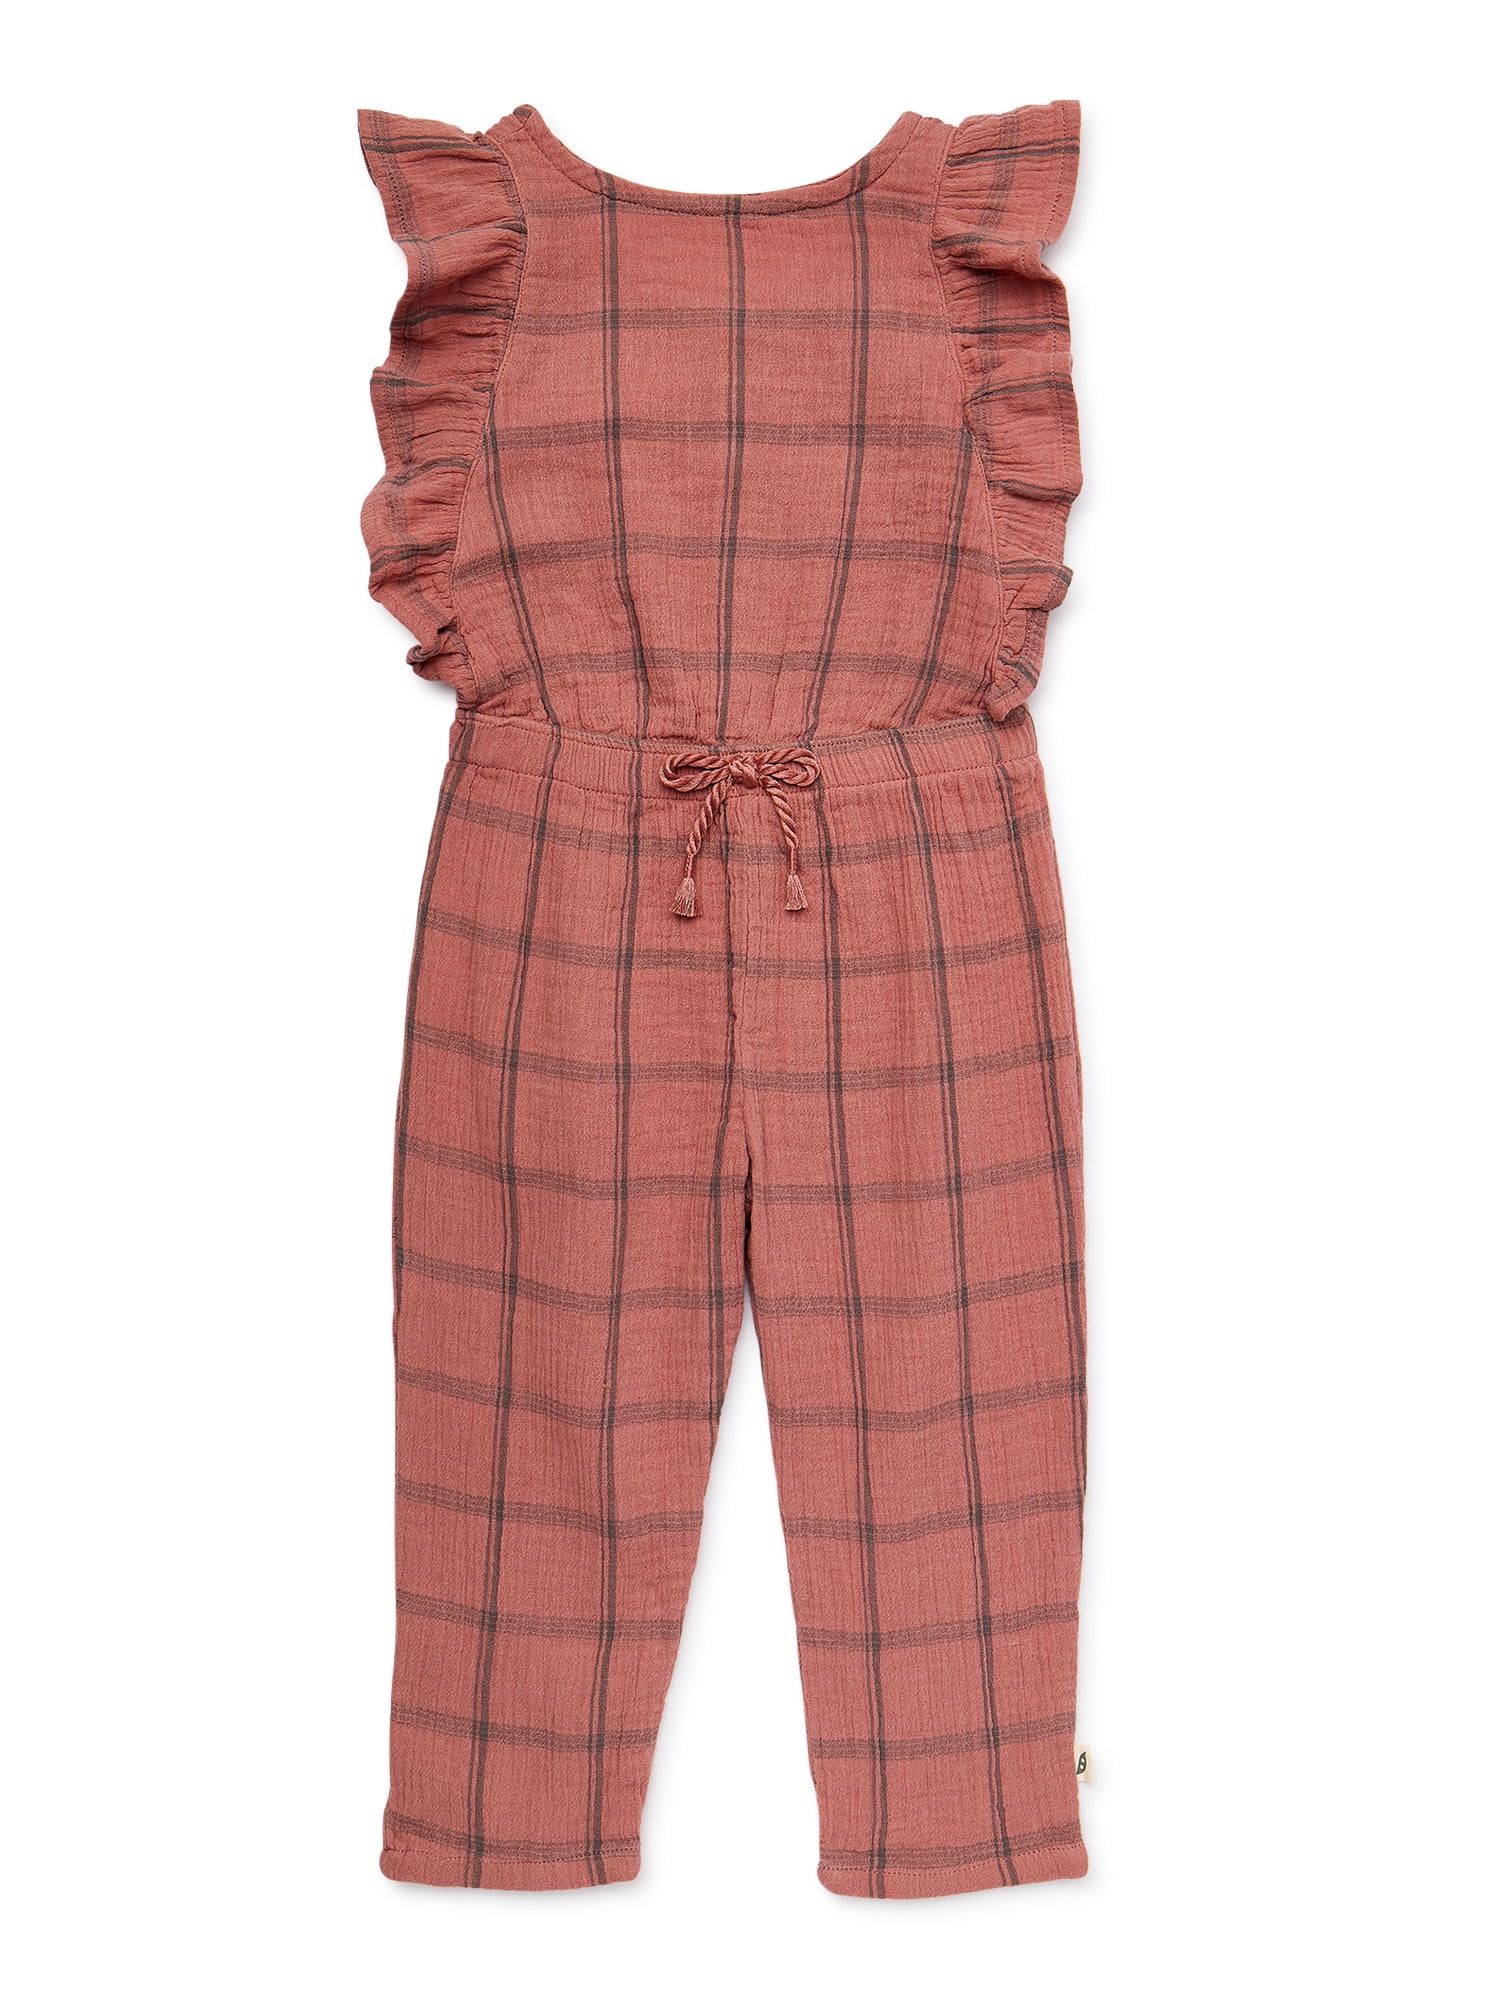 easy-peasy Baby and Toddler Girl Jumpsuit, Sizes 12 Months-5T